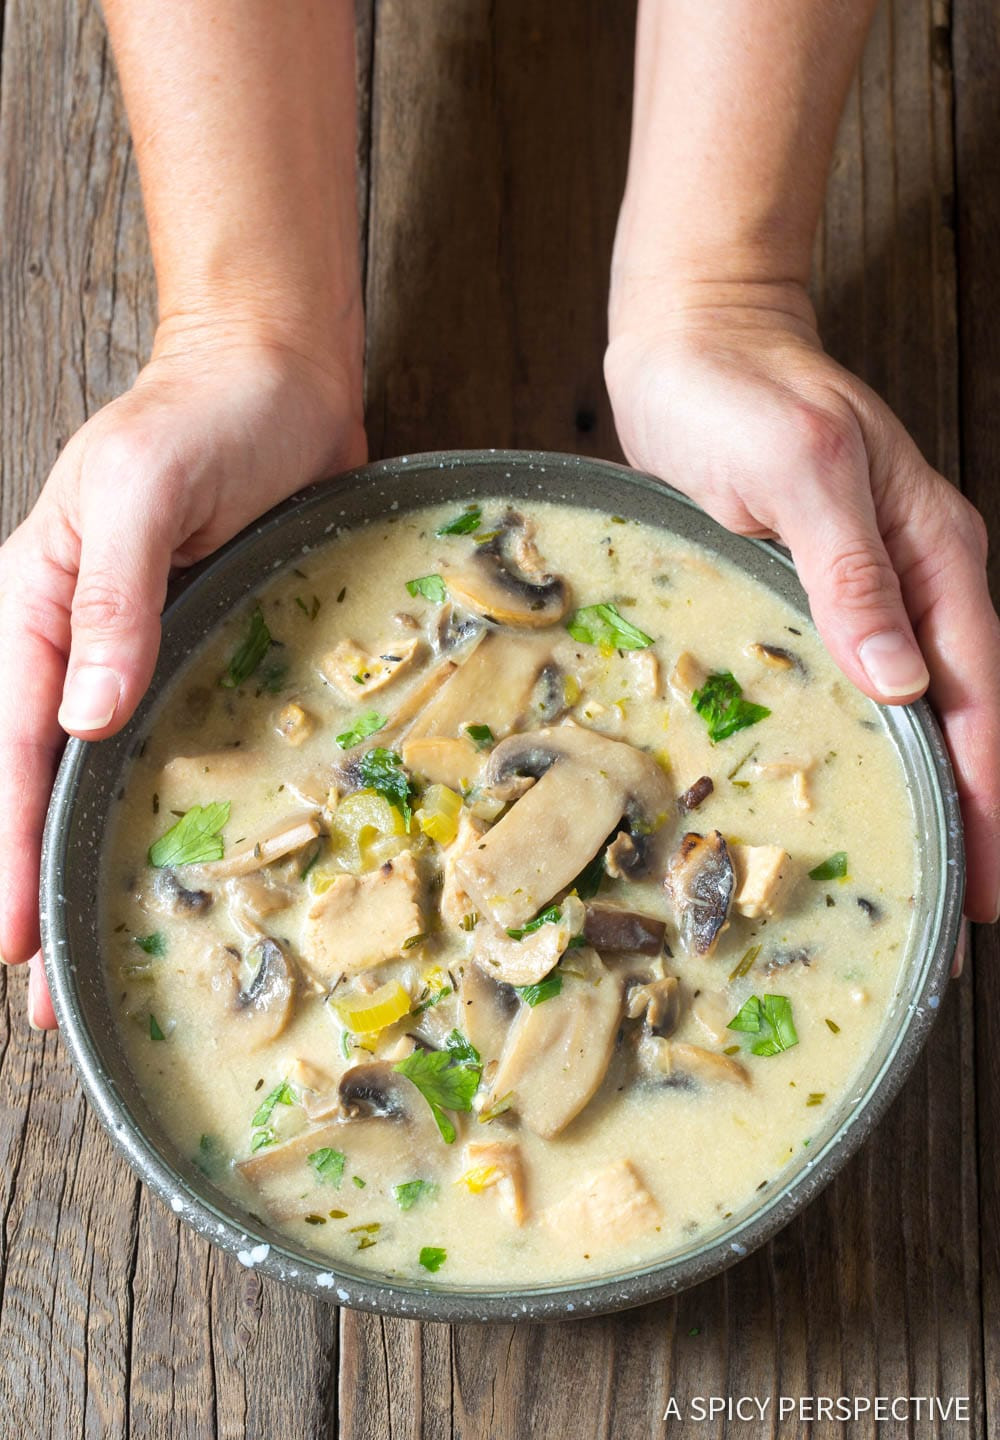 Recipes With Chicken And Cream Of Mushroom Soup
 Low Carb Chicken Mushroom Soup Video A Spicy Perspective